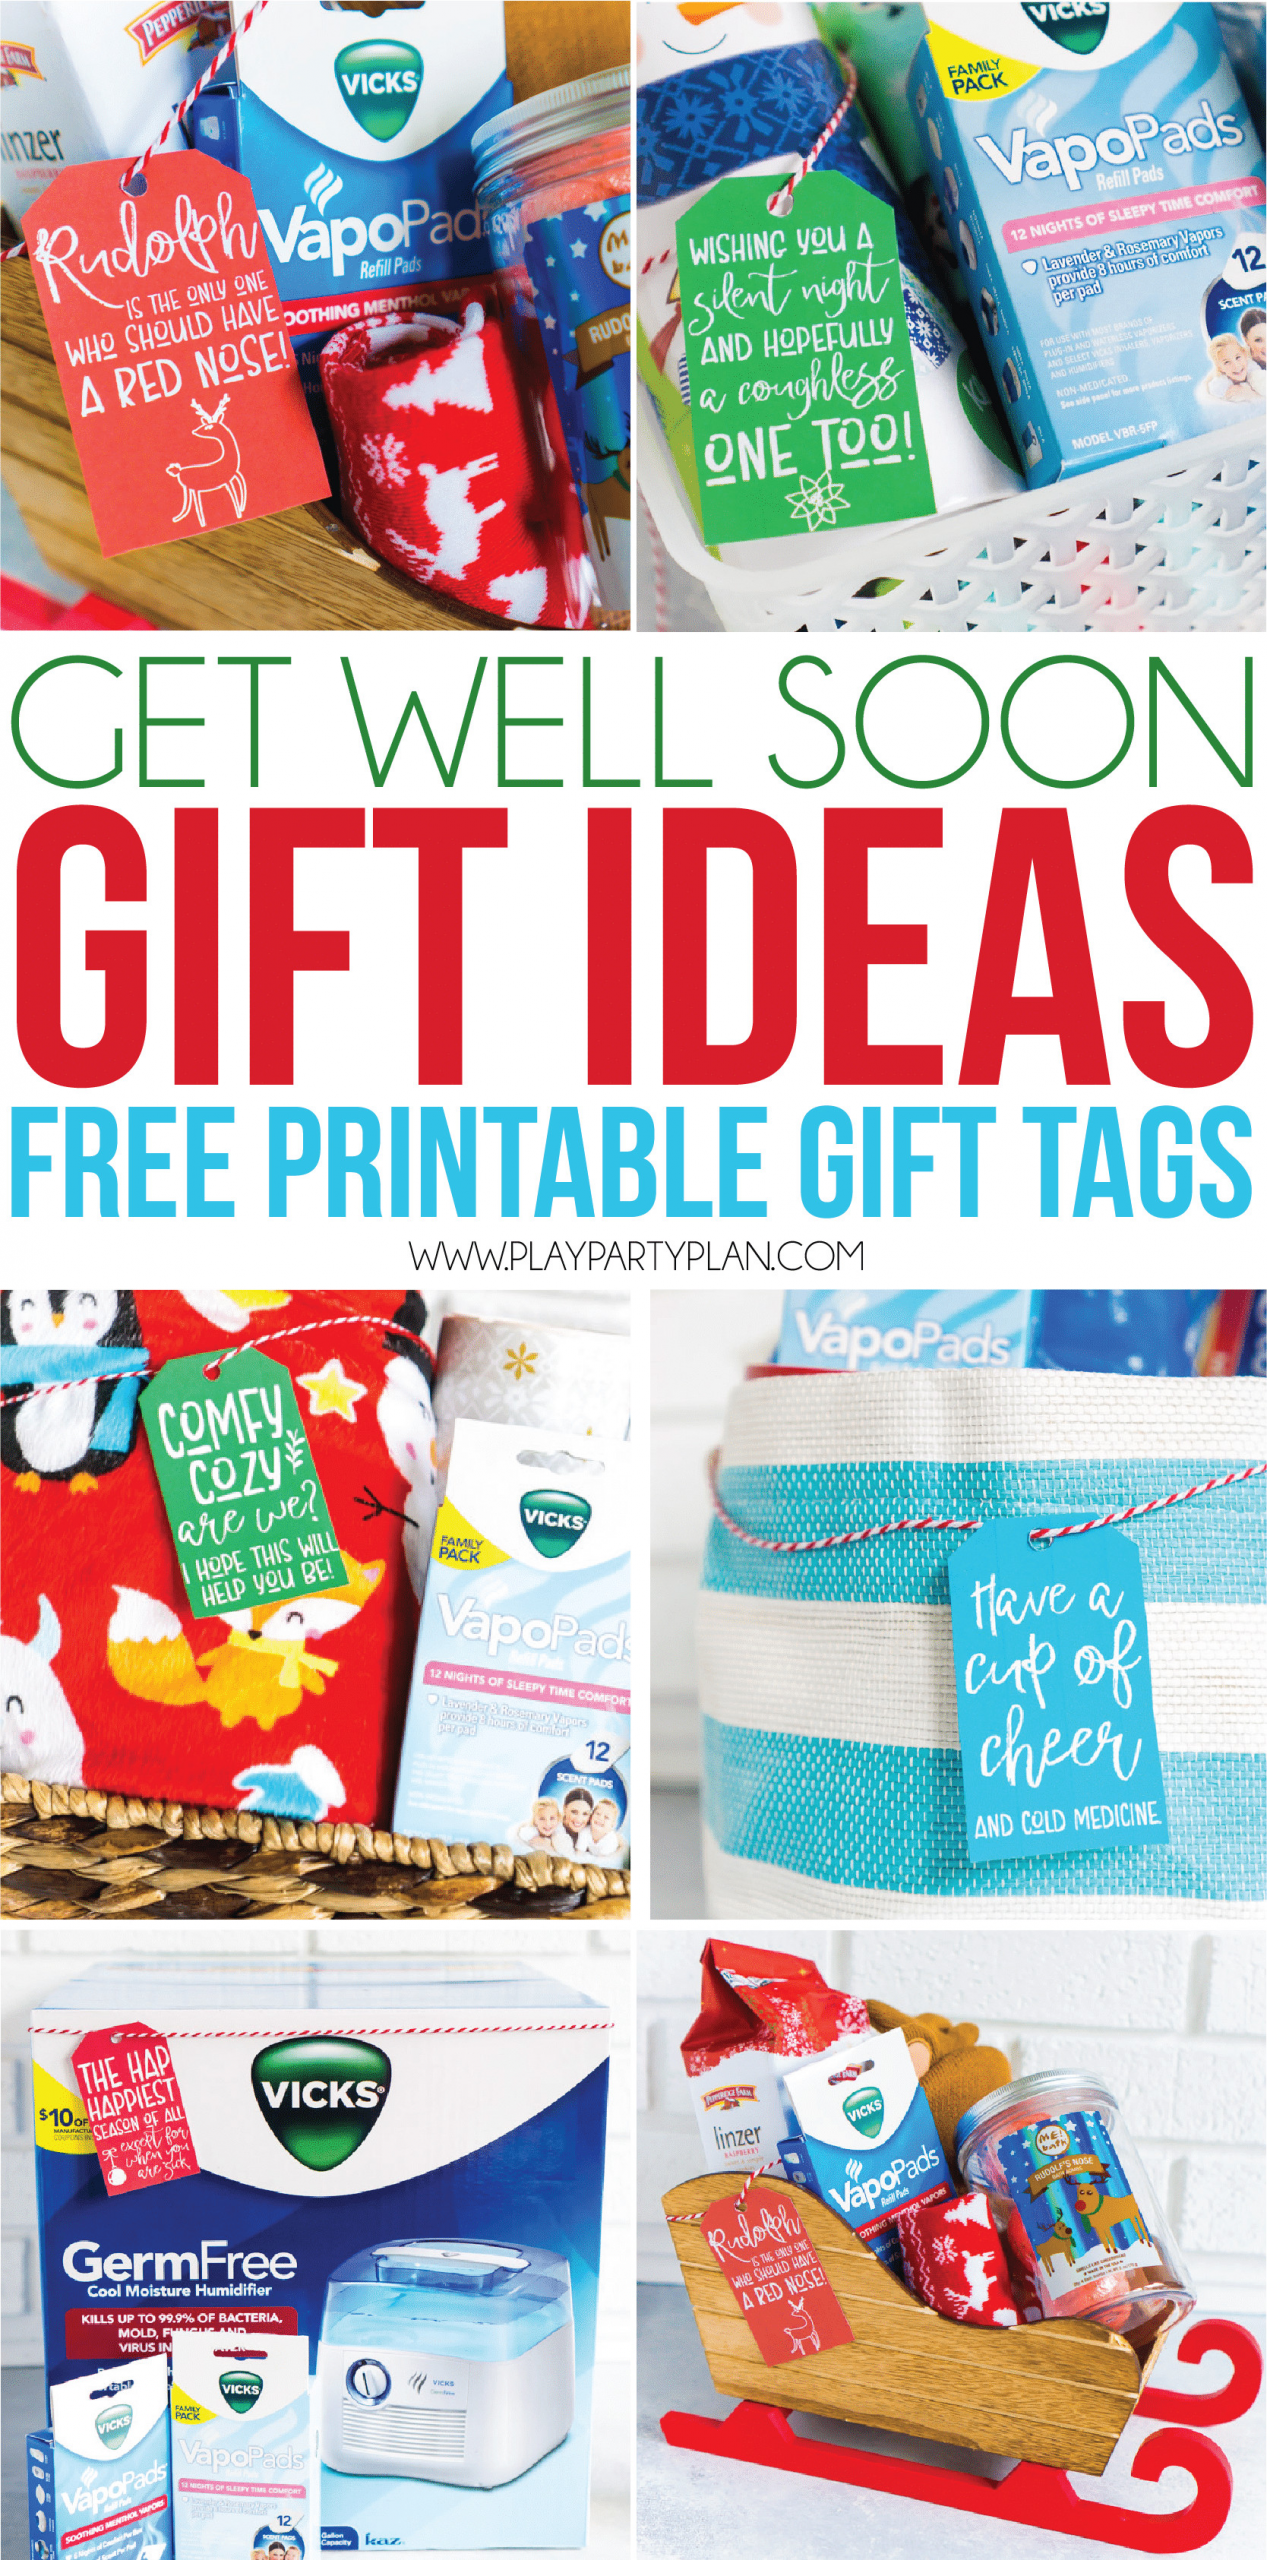 Get Well Gifts For Kids
 Funny Get Well Soon Gifts & Free Printable Cards Play